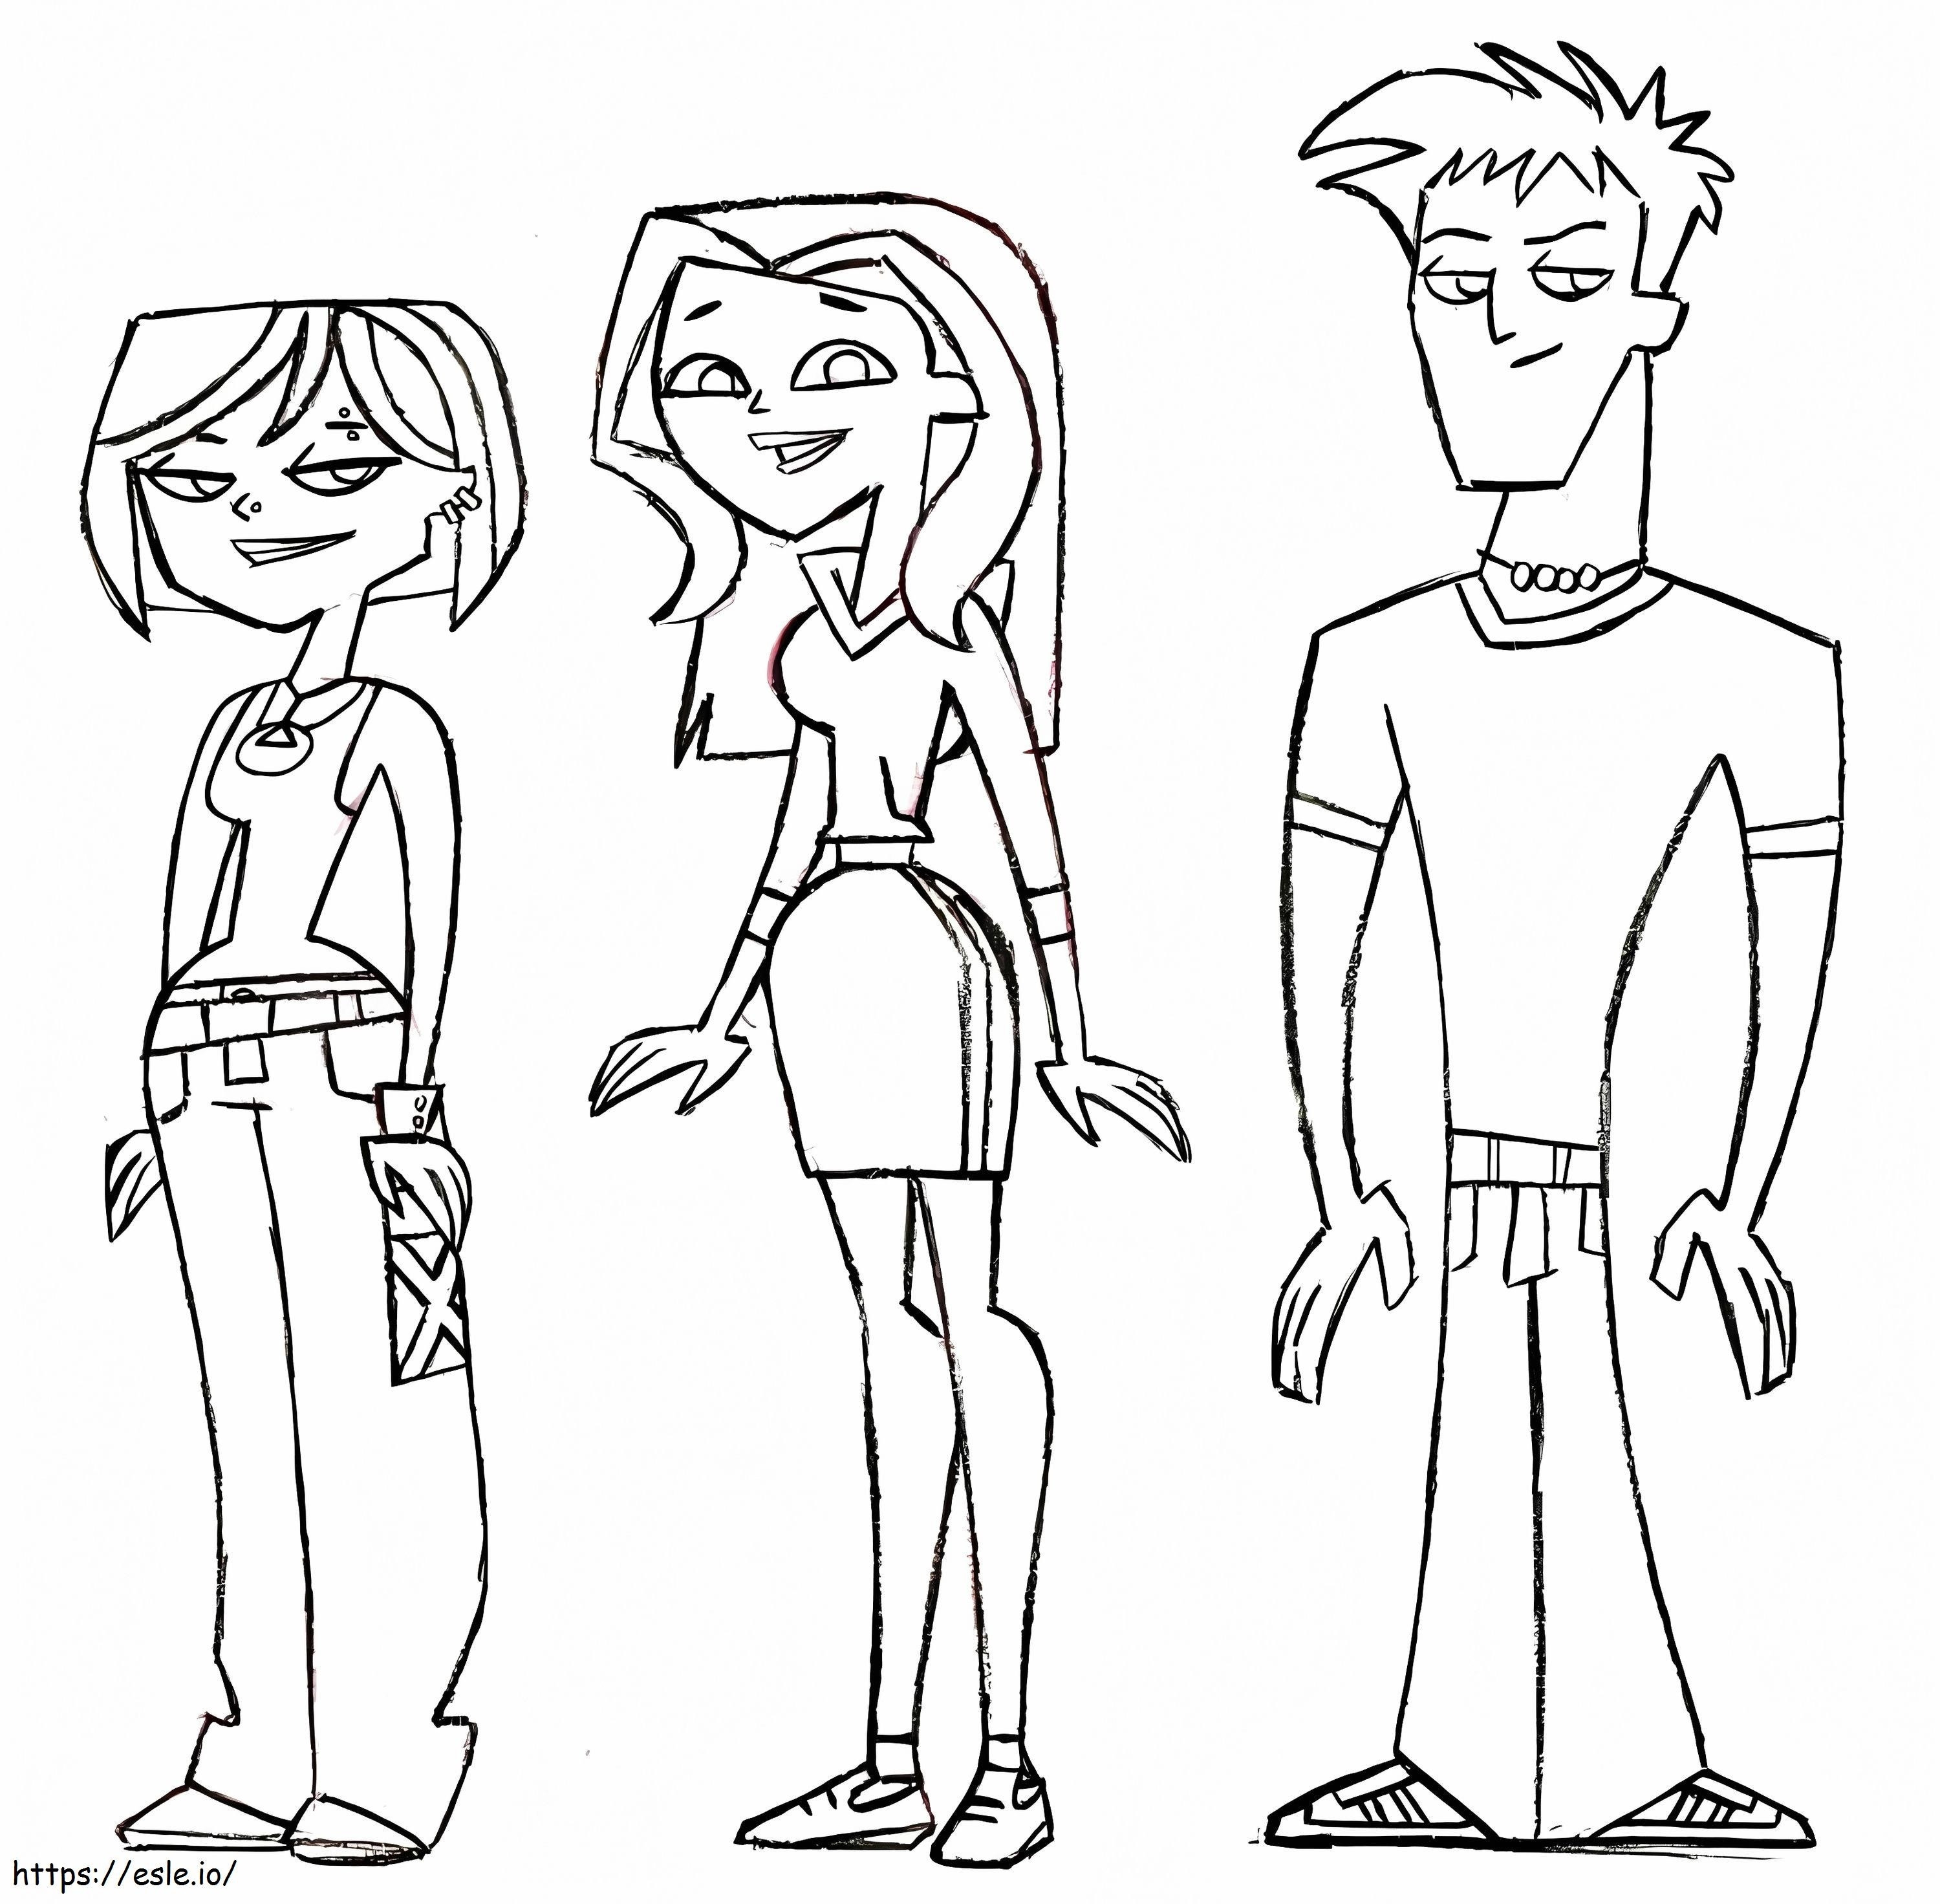 Characters In 6Teen 3 coloring page